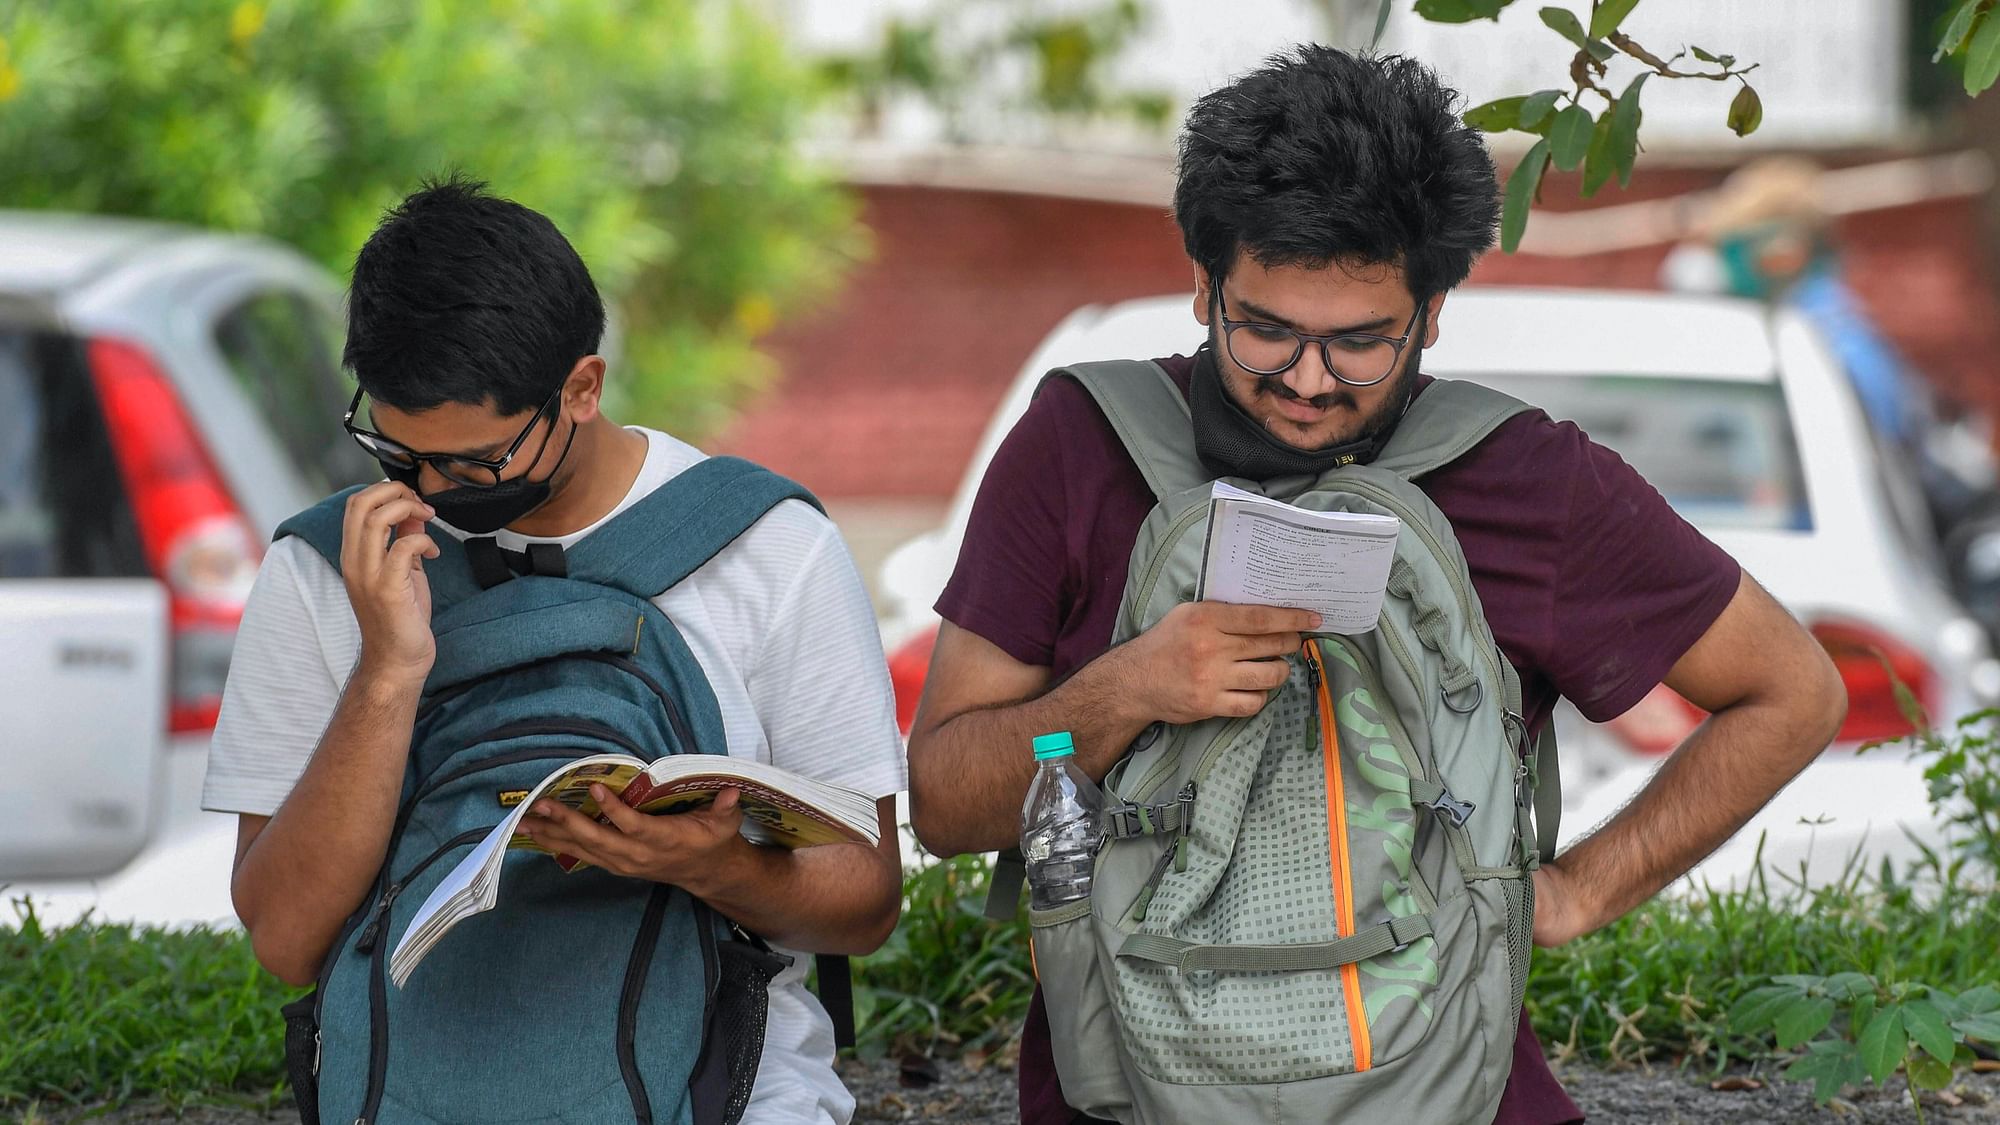 Haryana Final Year Exams 2020: Students travelling to exam centres from faraway places will also be provided with accommodation in hostels. Image used for representation only.